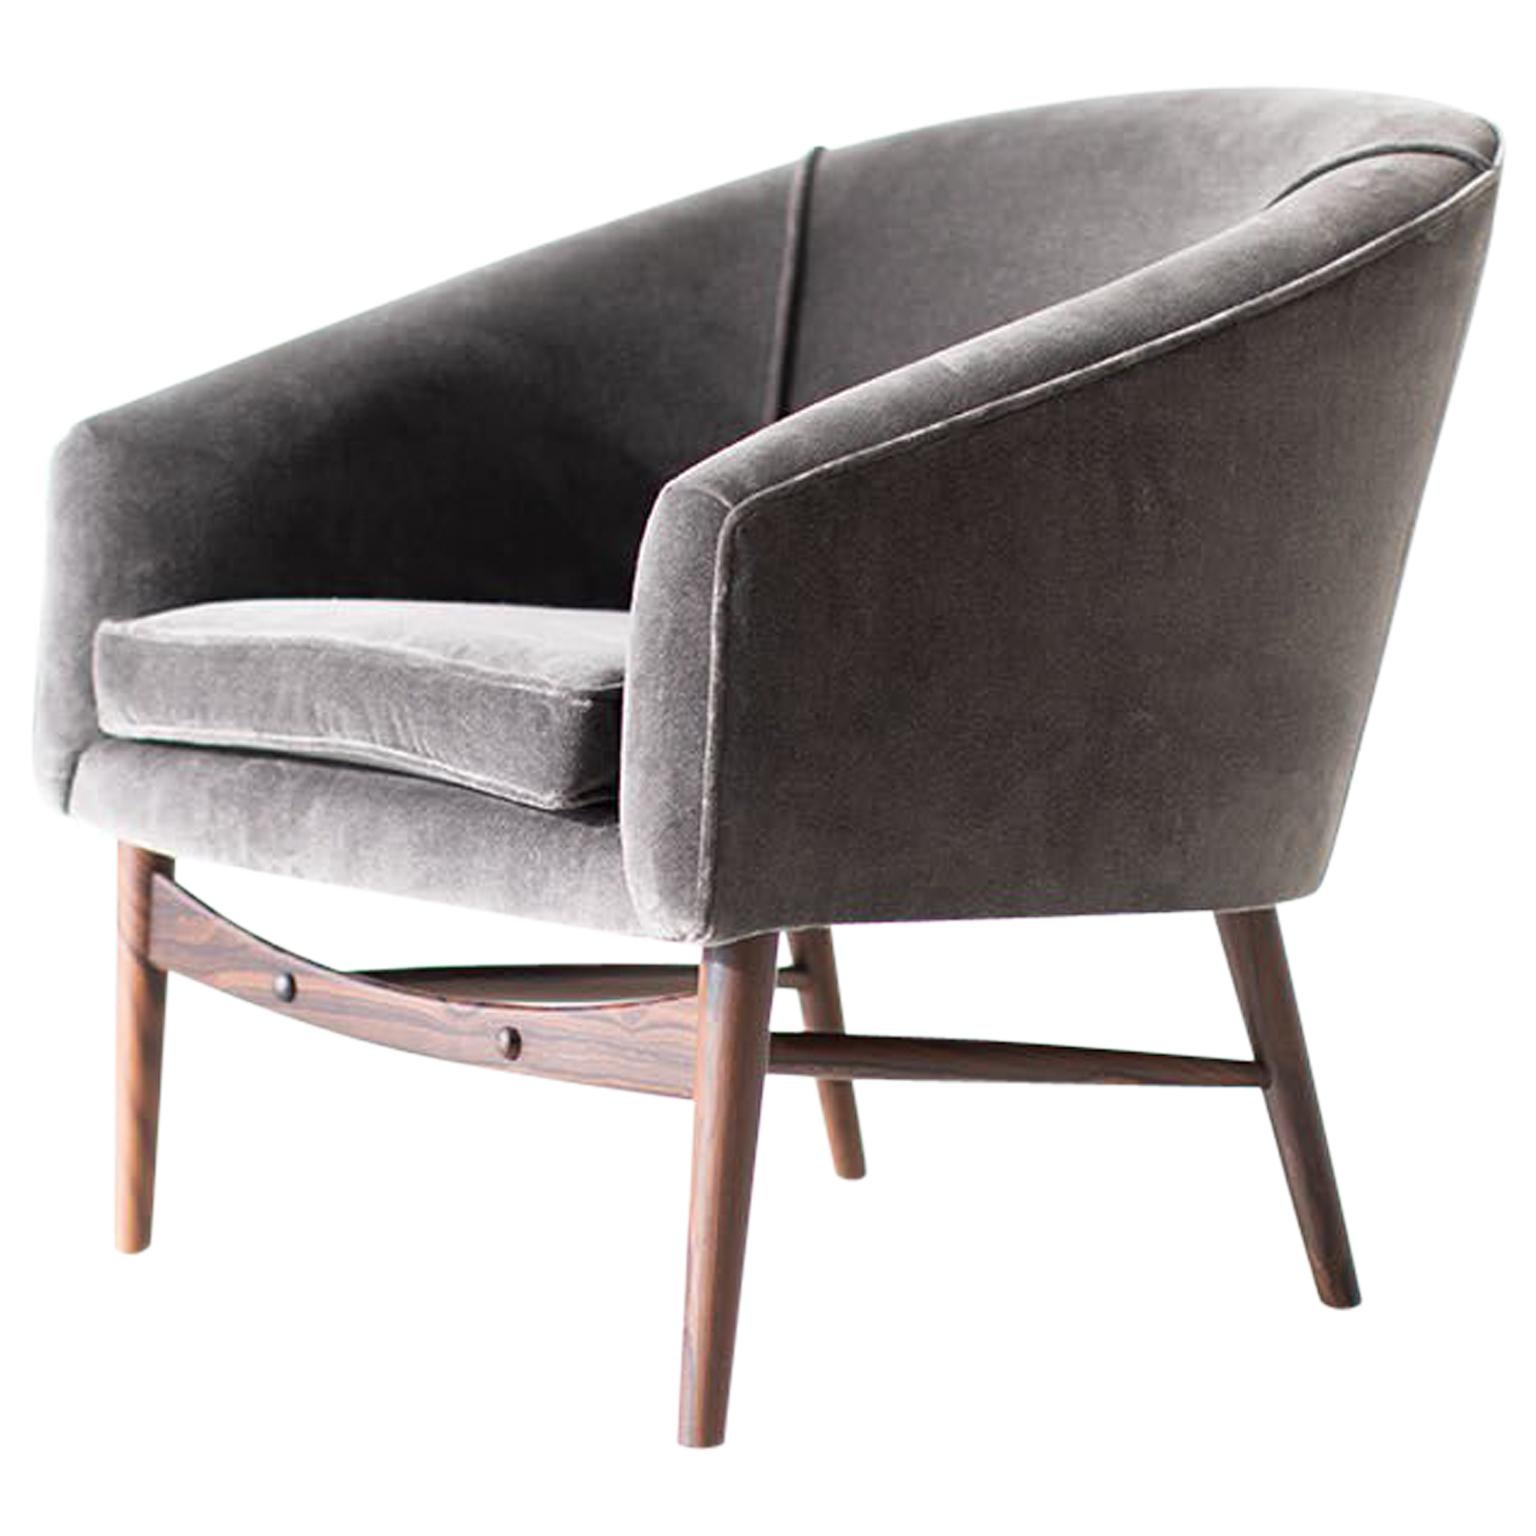 Lawrence Peabody Lounge Chair for Craft Associates